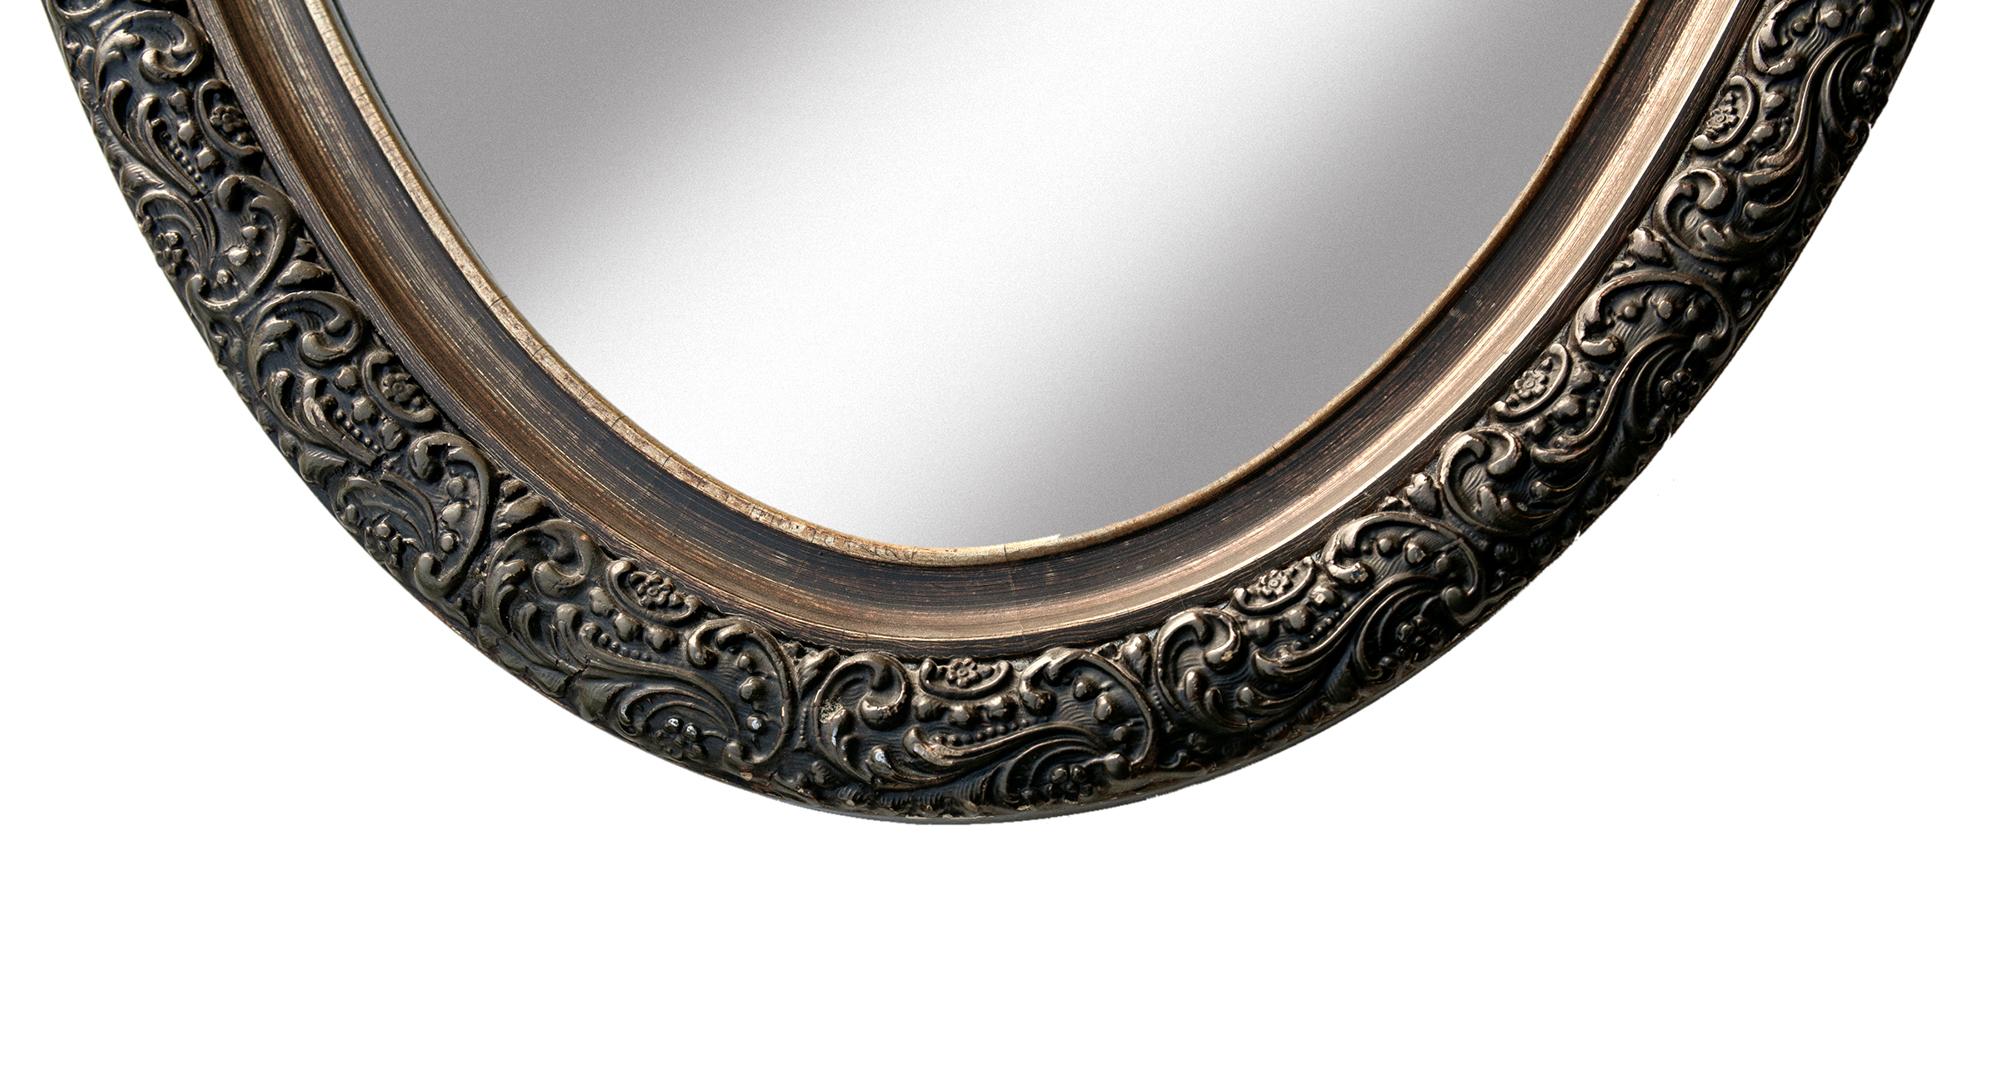 1940's two toned Hollywood Recency painted & giltwood oval mirror, ready to be hung vertically or horizontally.
The dark tone enhances the ornate broad border. The inner frame has a bright edge around the convex antiqued groove.
 
